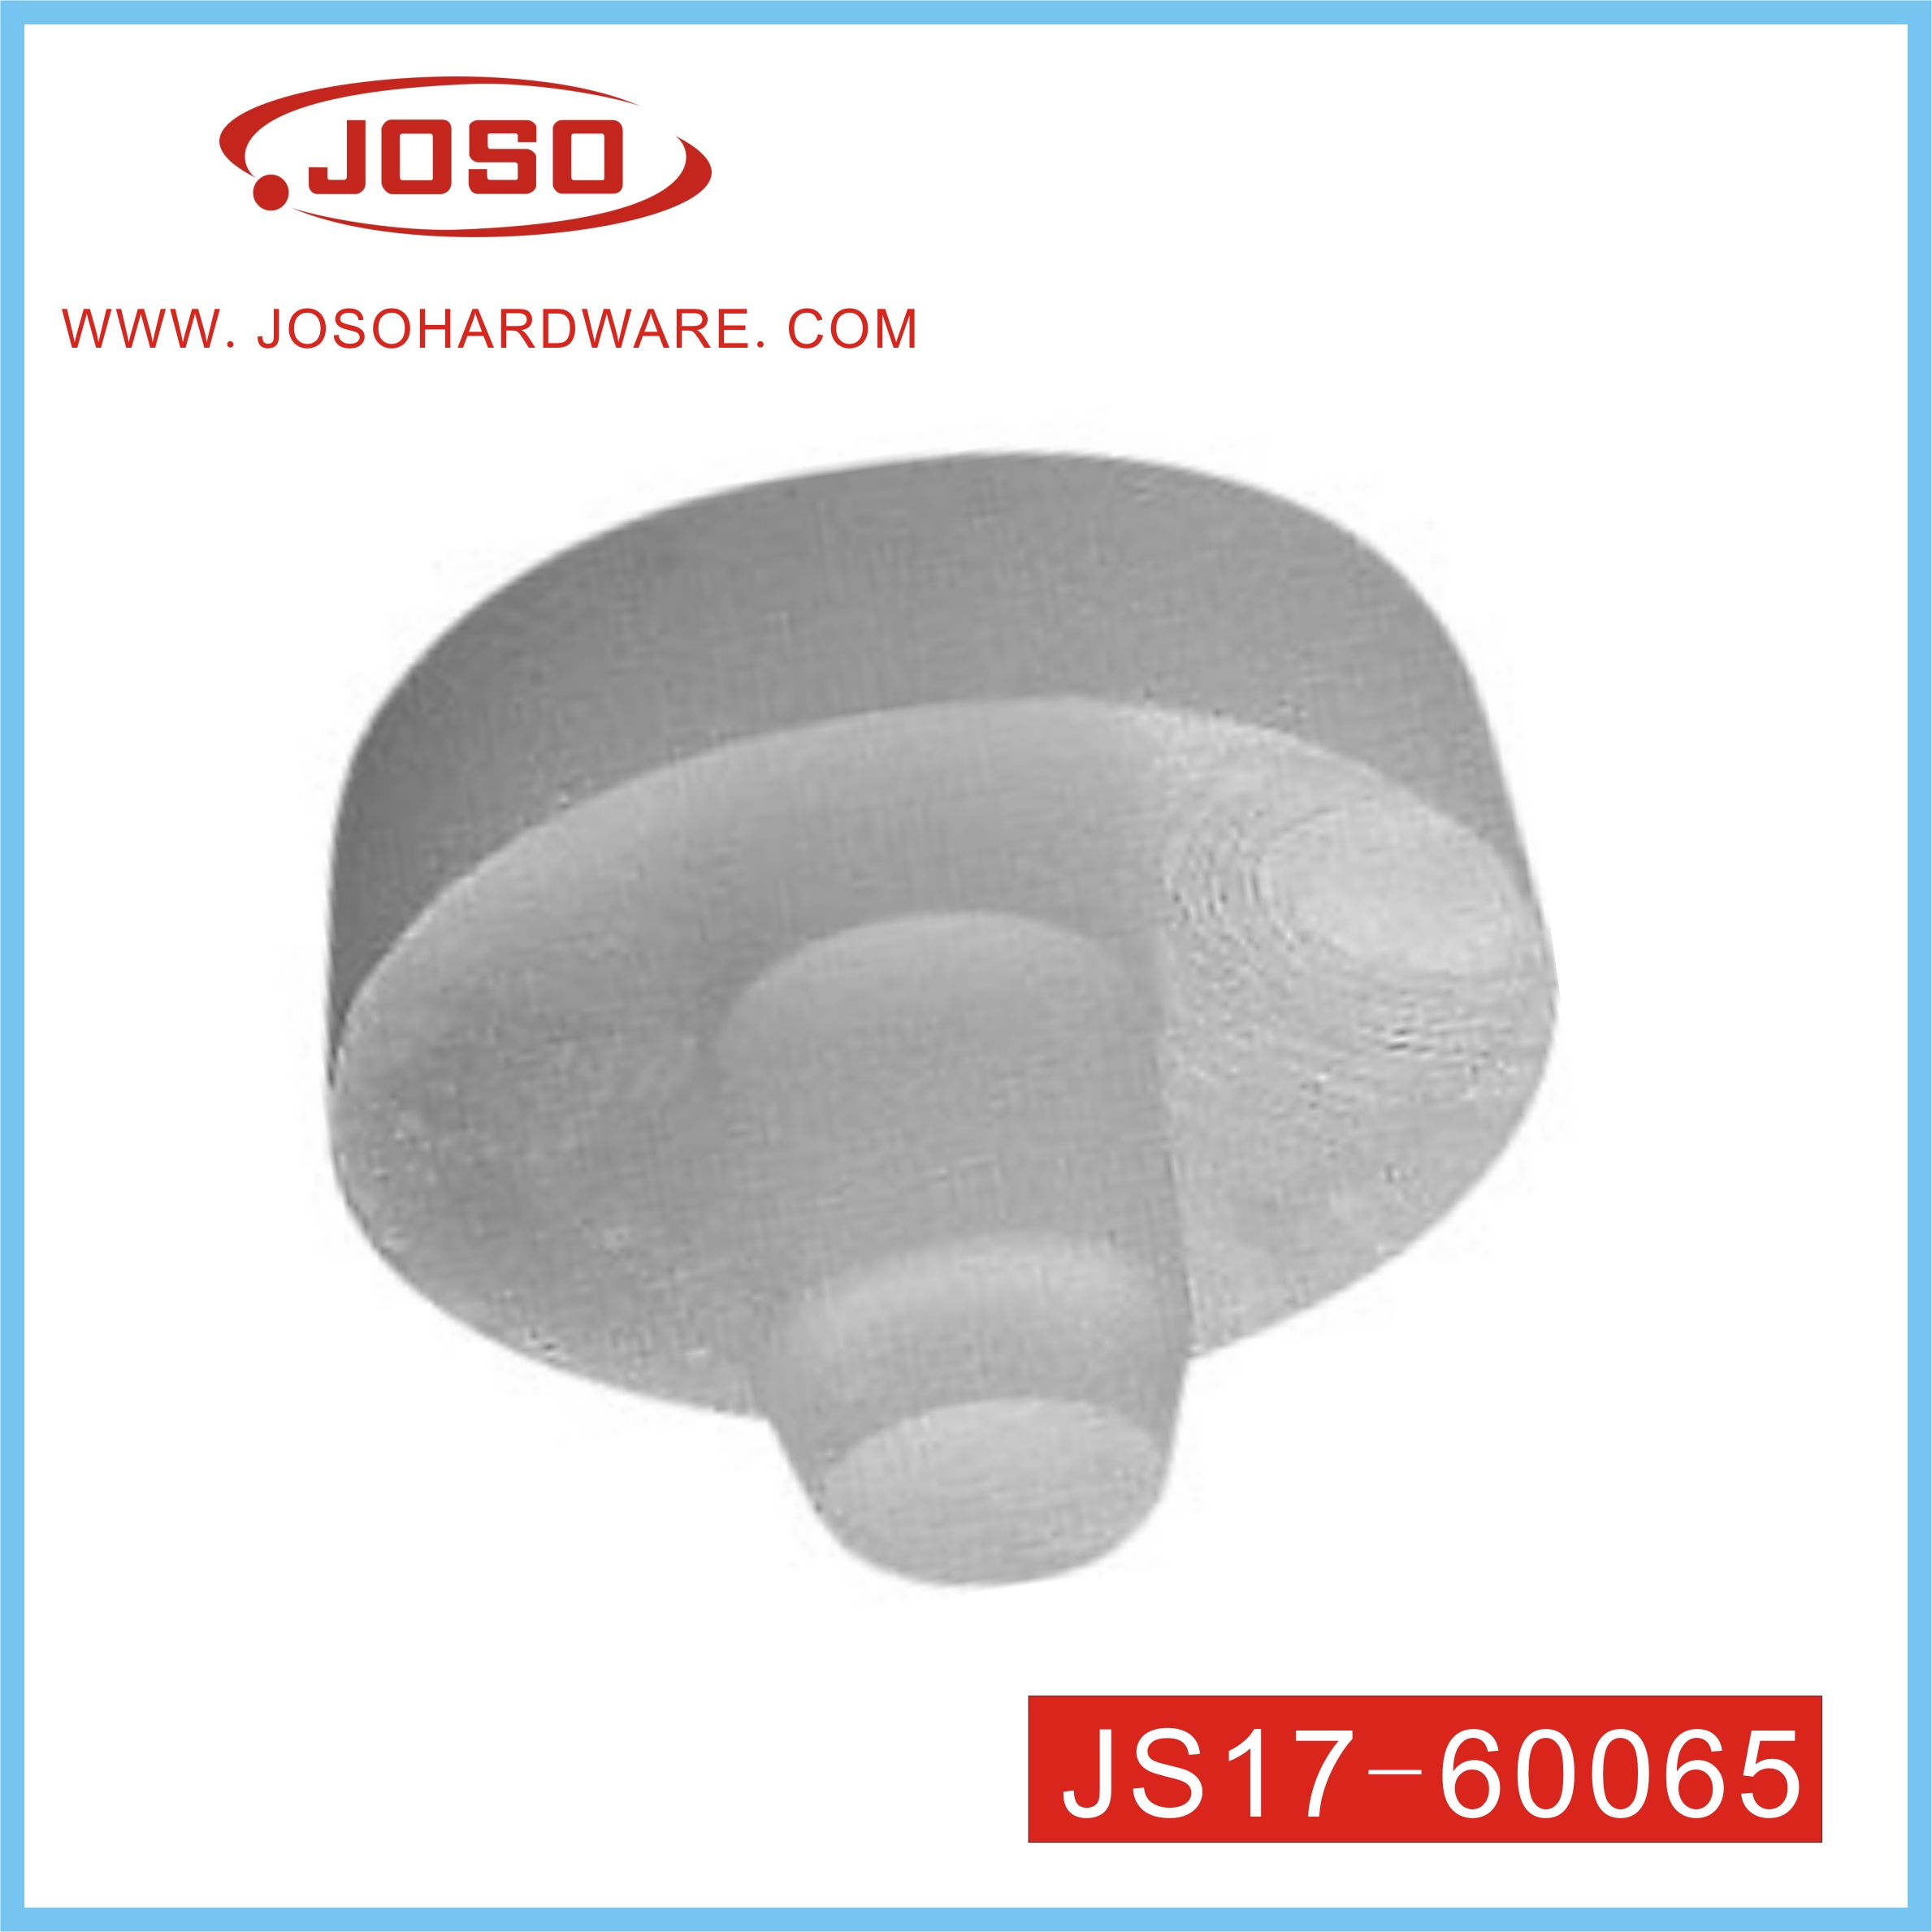 PVC Diameter 17mm Flat Pad of Furniture Hardware for Connector